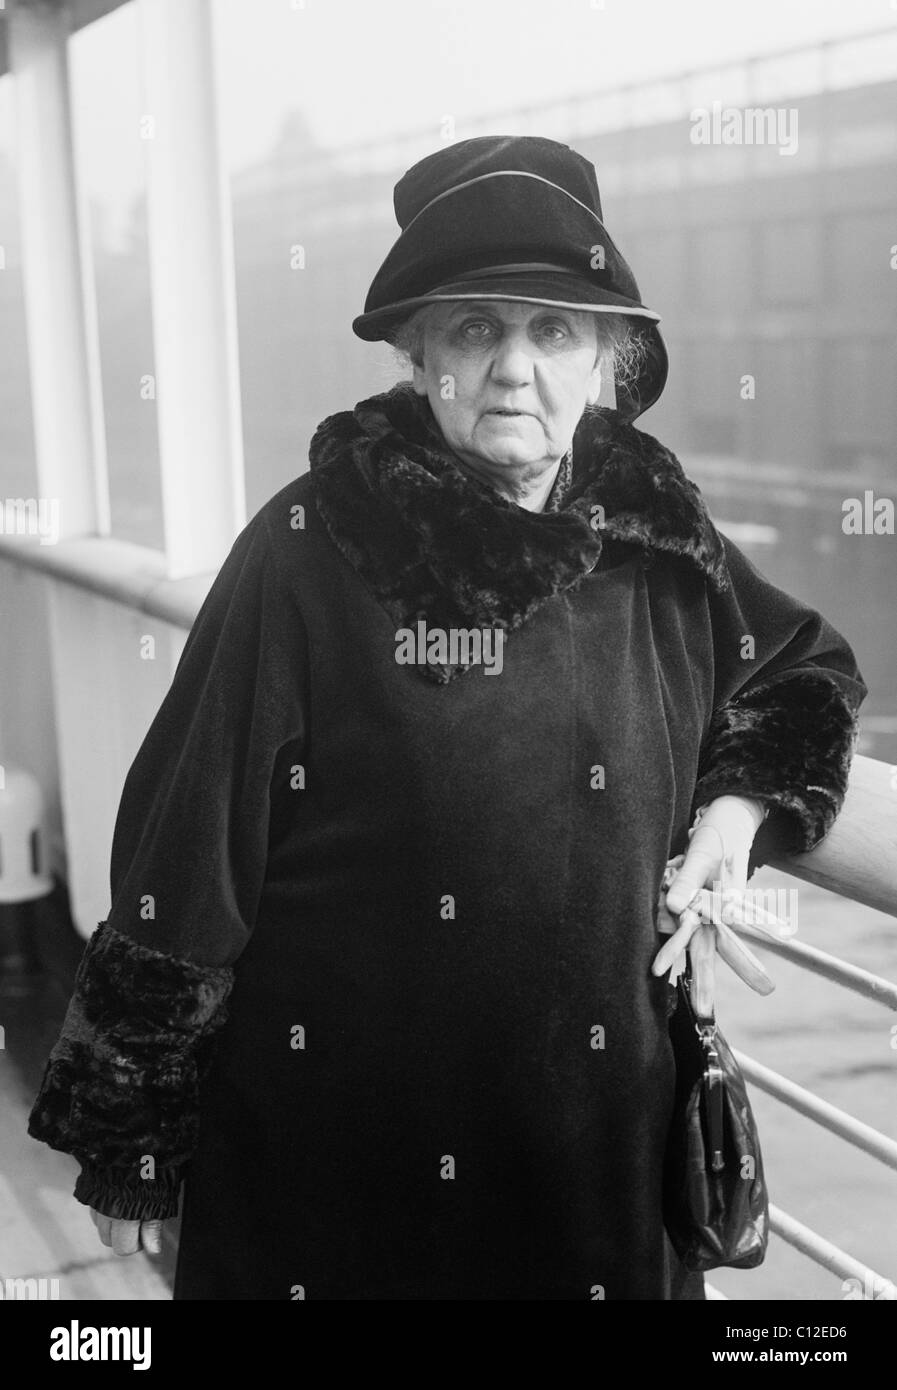 American social reformer, activist and pacifist Jane Addams (1860 - 1935) - co-winner of the Nobel Peace Prize in 1931. Stock Photo